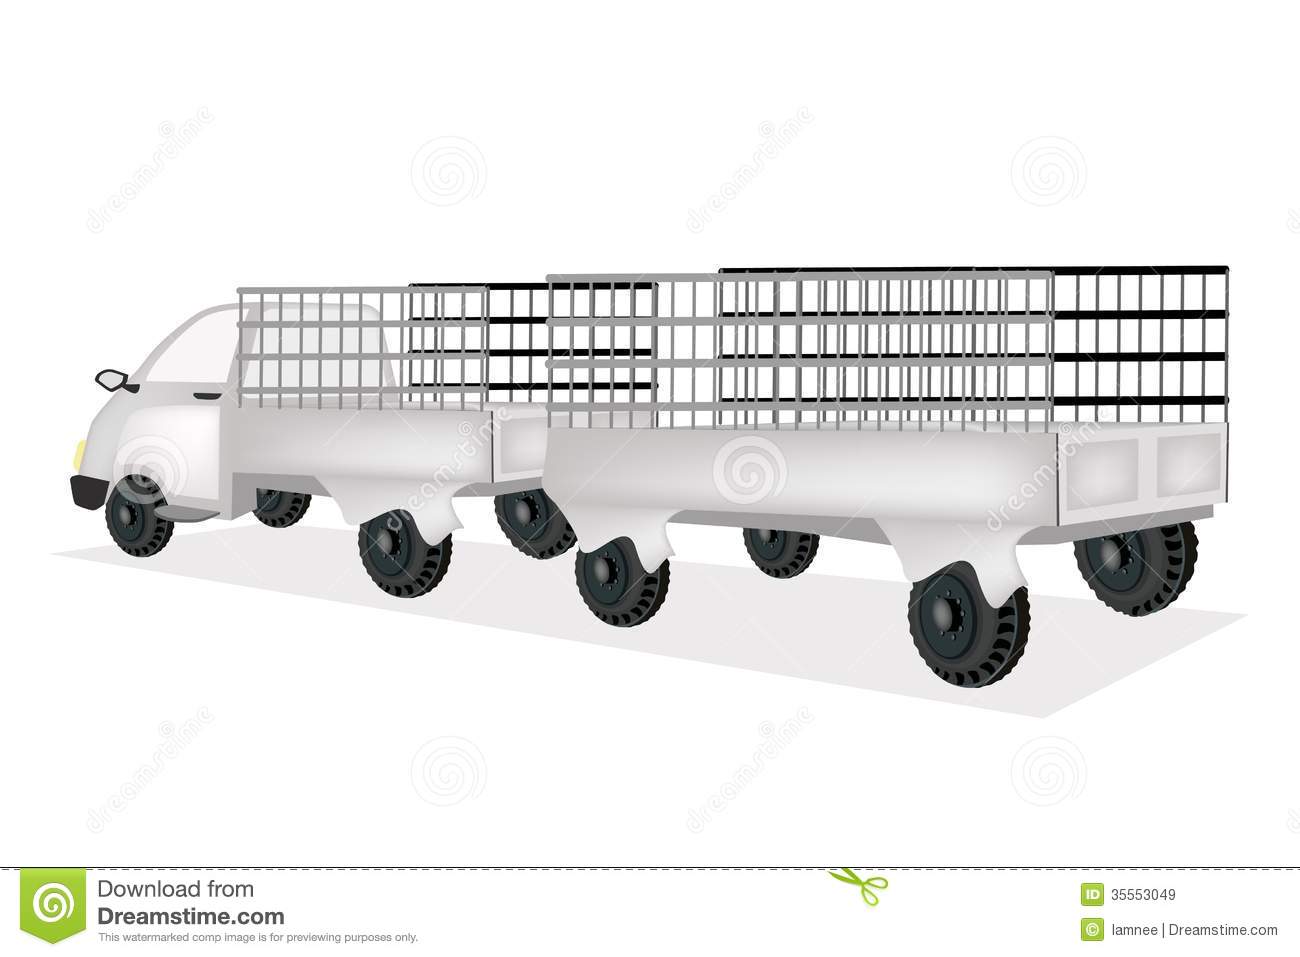 Illustration Of Truck Towing A Utility Trailer Or Goods Trailer For